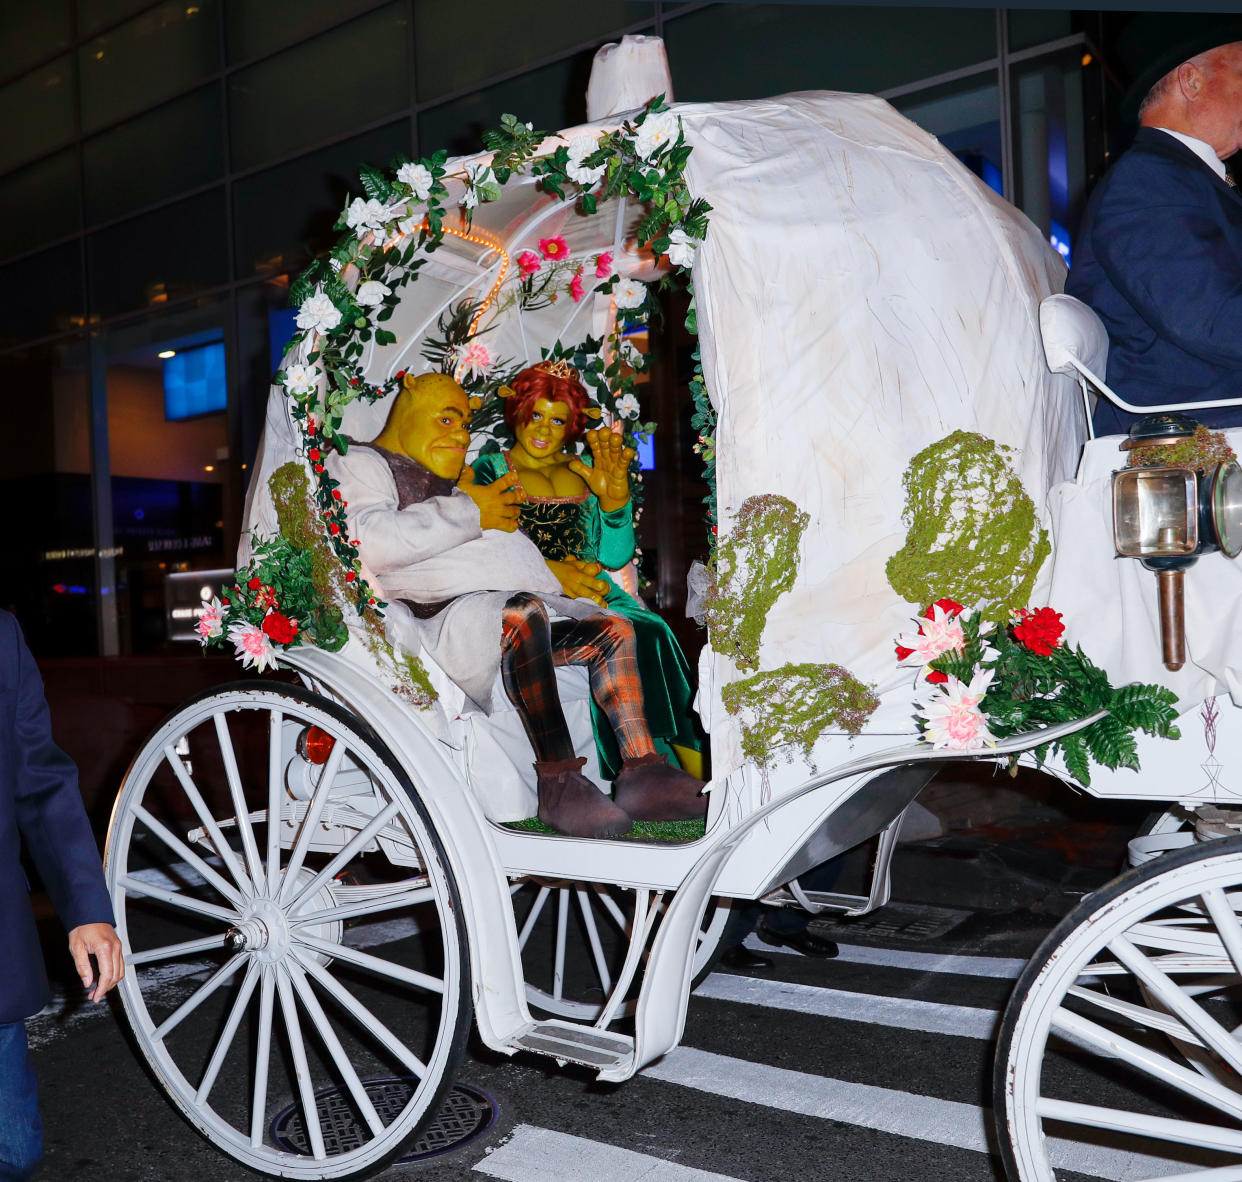 NEW YORK, NY - OCTOBER 31:  Heidi Klum and Tom Kaulitz dressed up as Fiona and Shrek at her annual Halloween bash in a horse-drawn carriage on October 31, 2018 in New York City.  (Photo by Jackson Lee/GC Images)